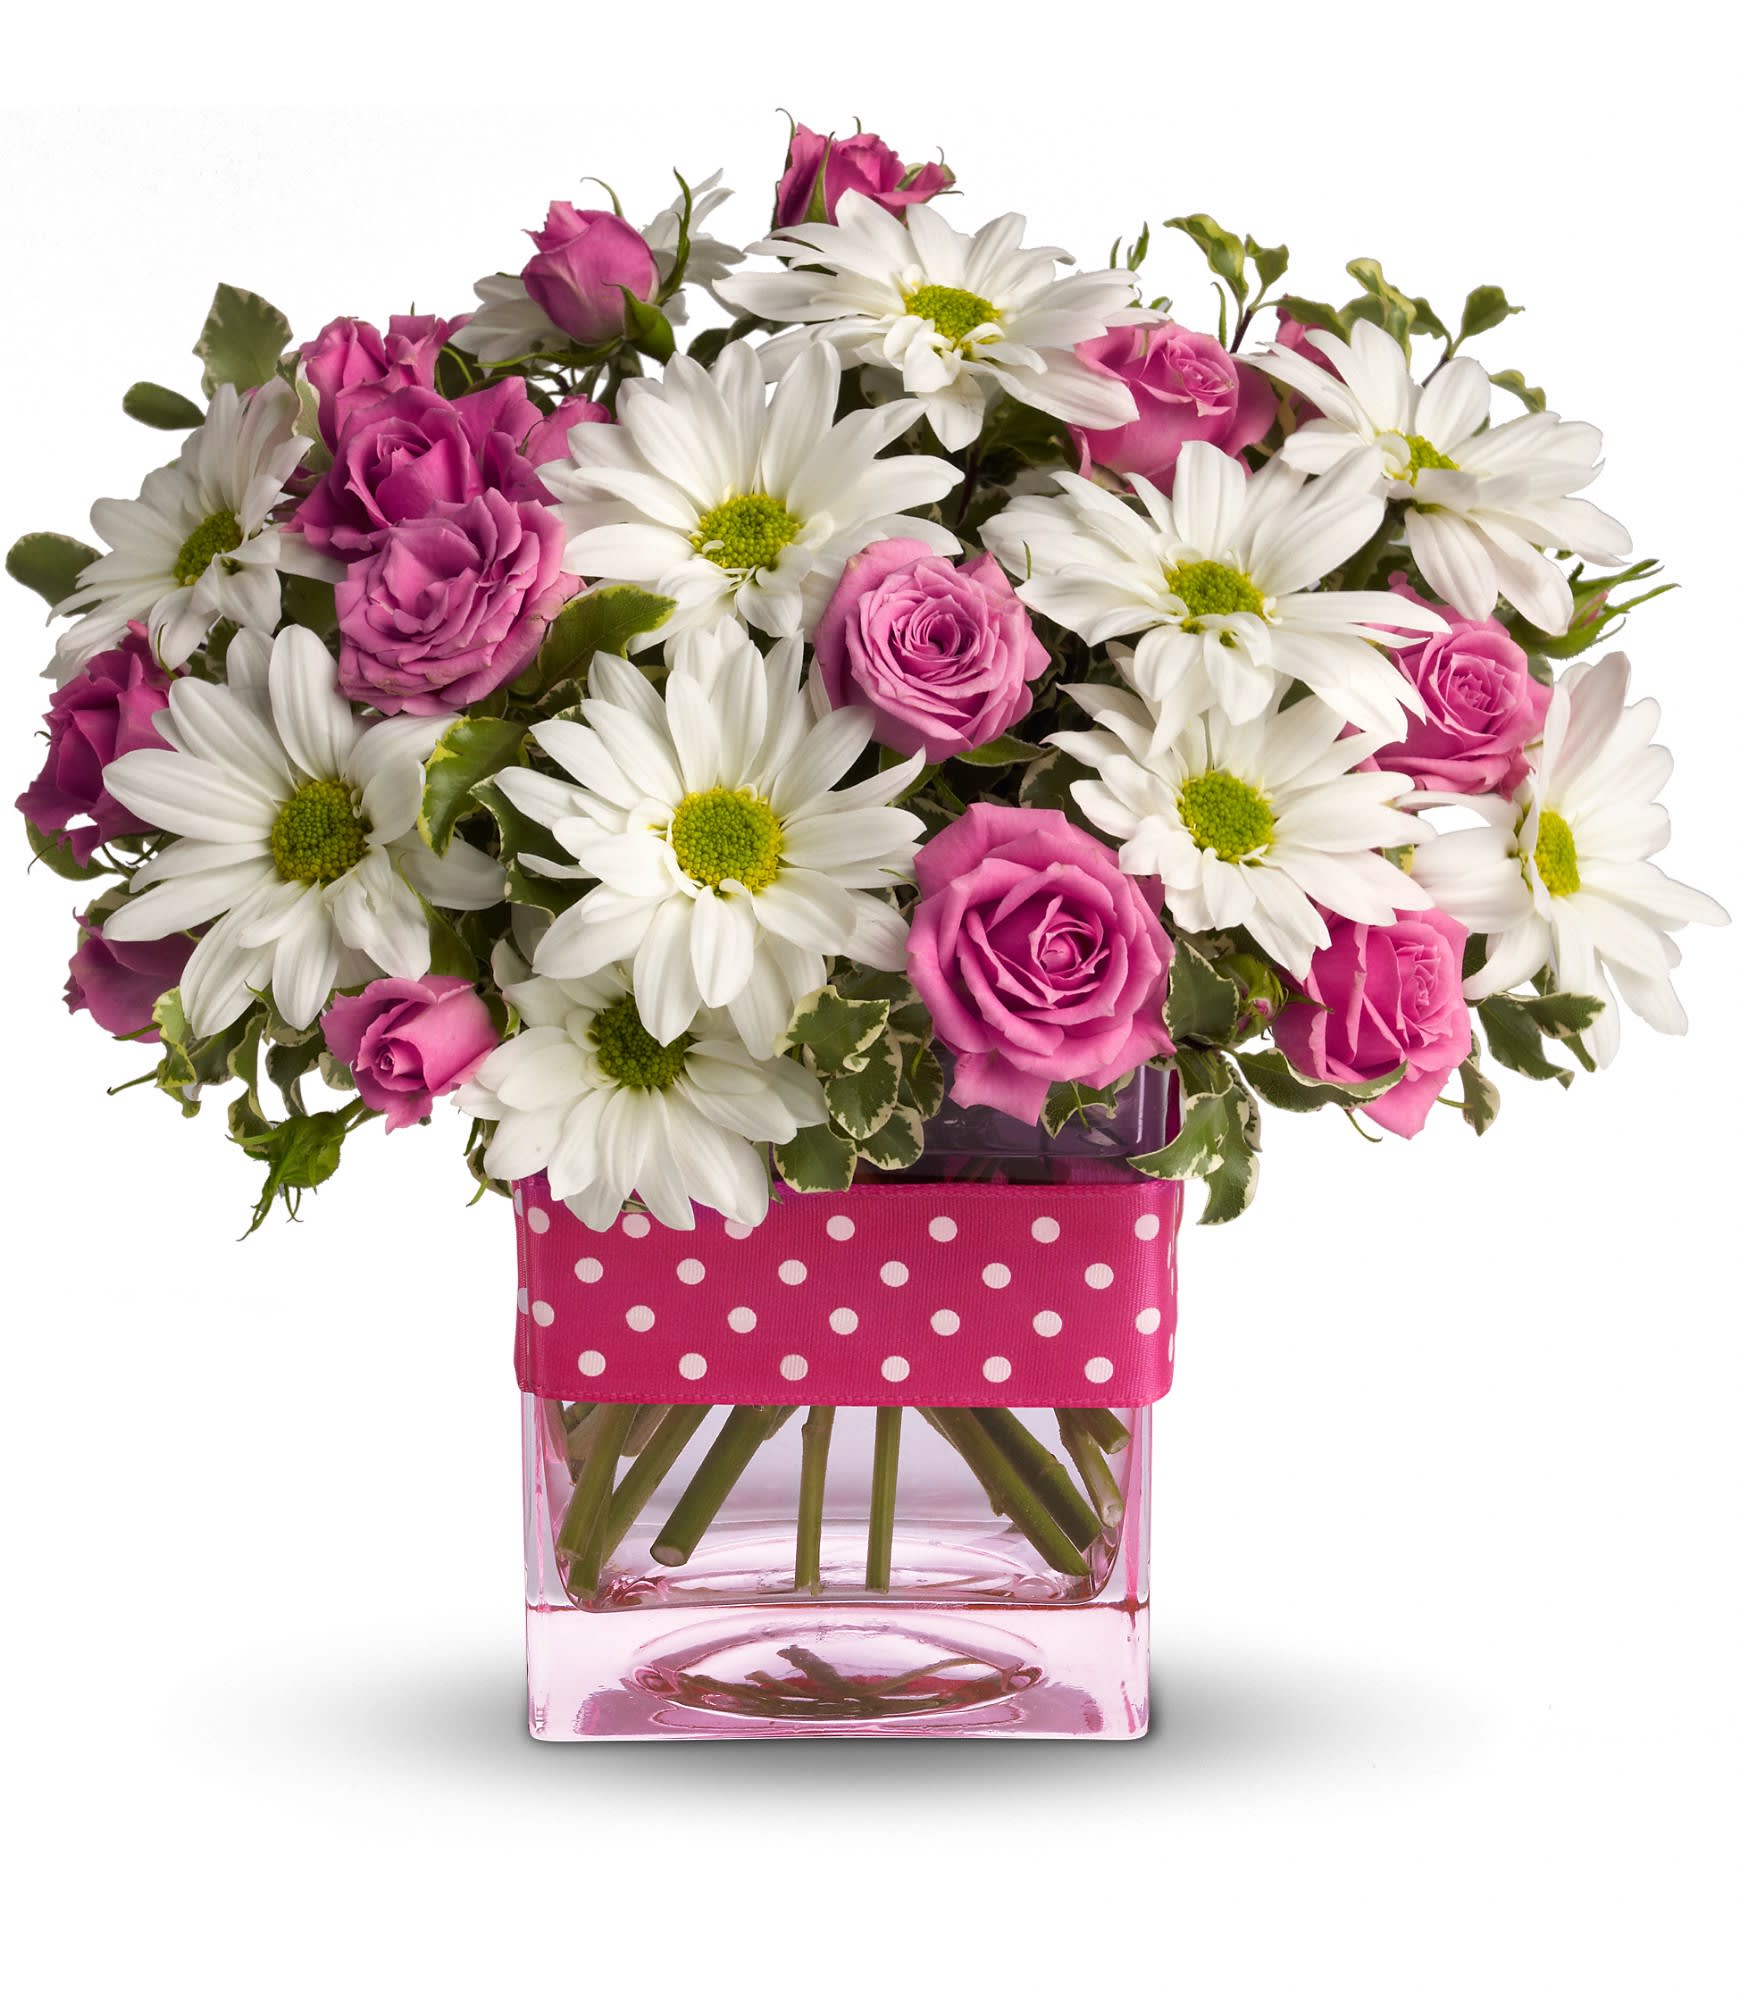 Polka Dots and Posies Aplenty - Polka dots and posies, they're the perfect pair. Well, at least in this pretty arrangement they are. Just the right flowers in just the right vase all wrapped up inâ¦ you guessed it, just the right ribbon. 